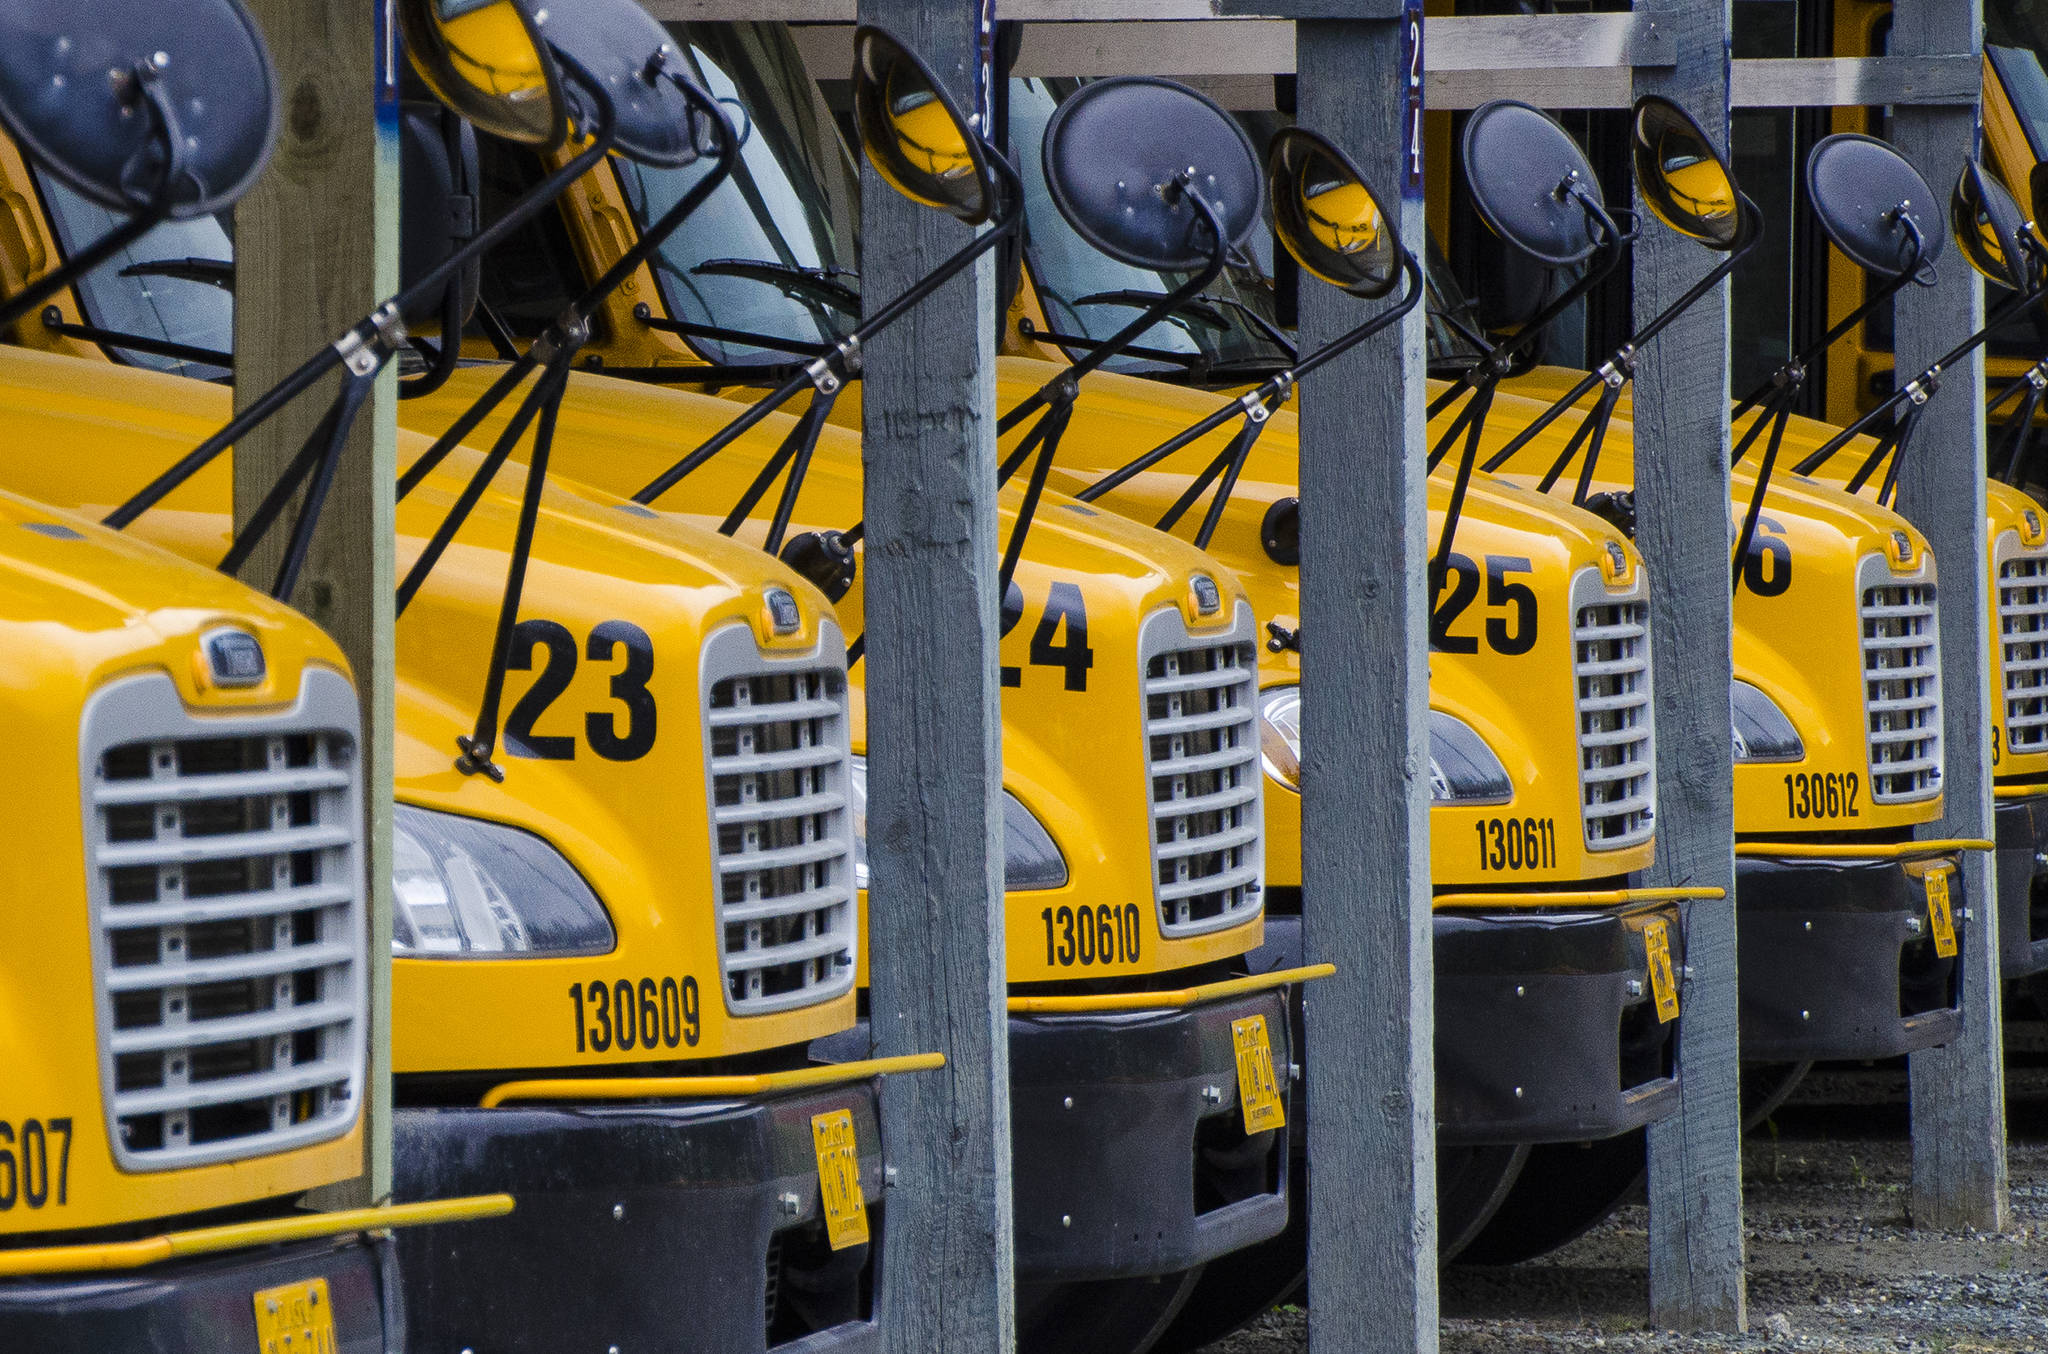 School buses sit idle at the First Student lot on Mendenhall Loop Road on Thursday. Buses are used during summer months for summer school.